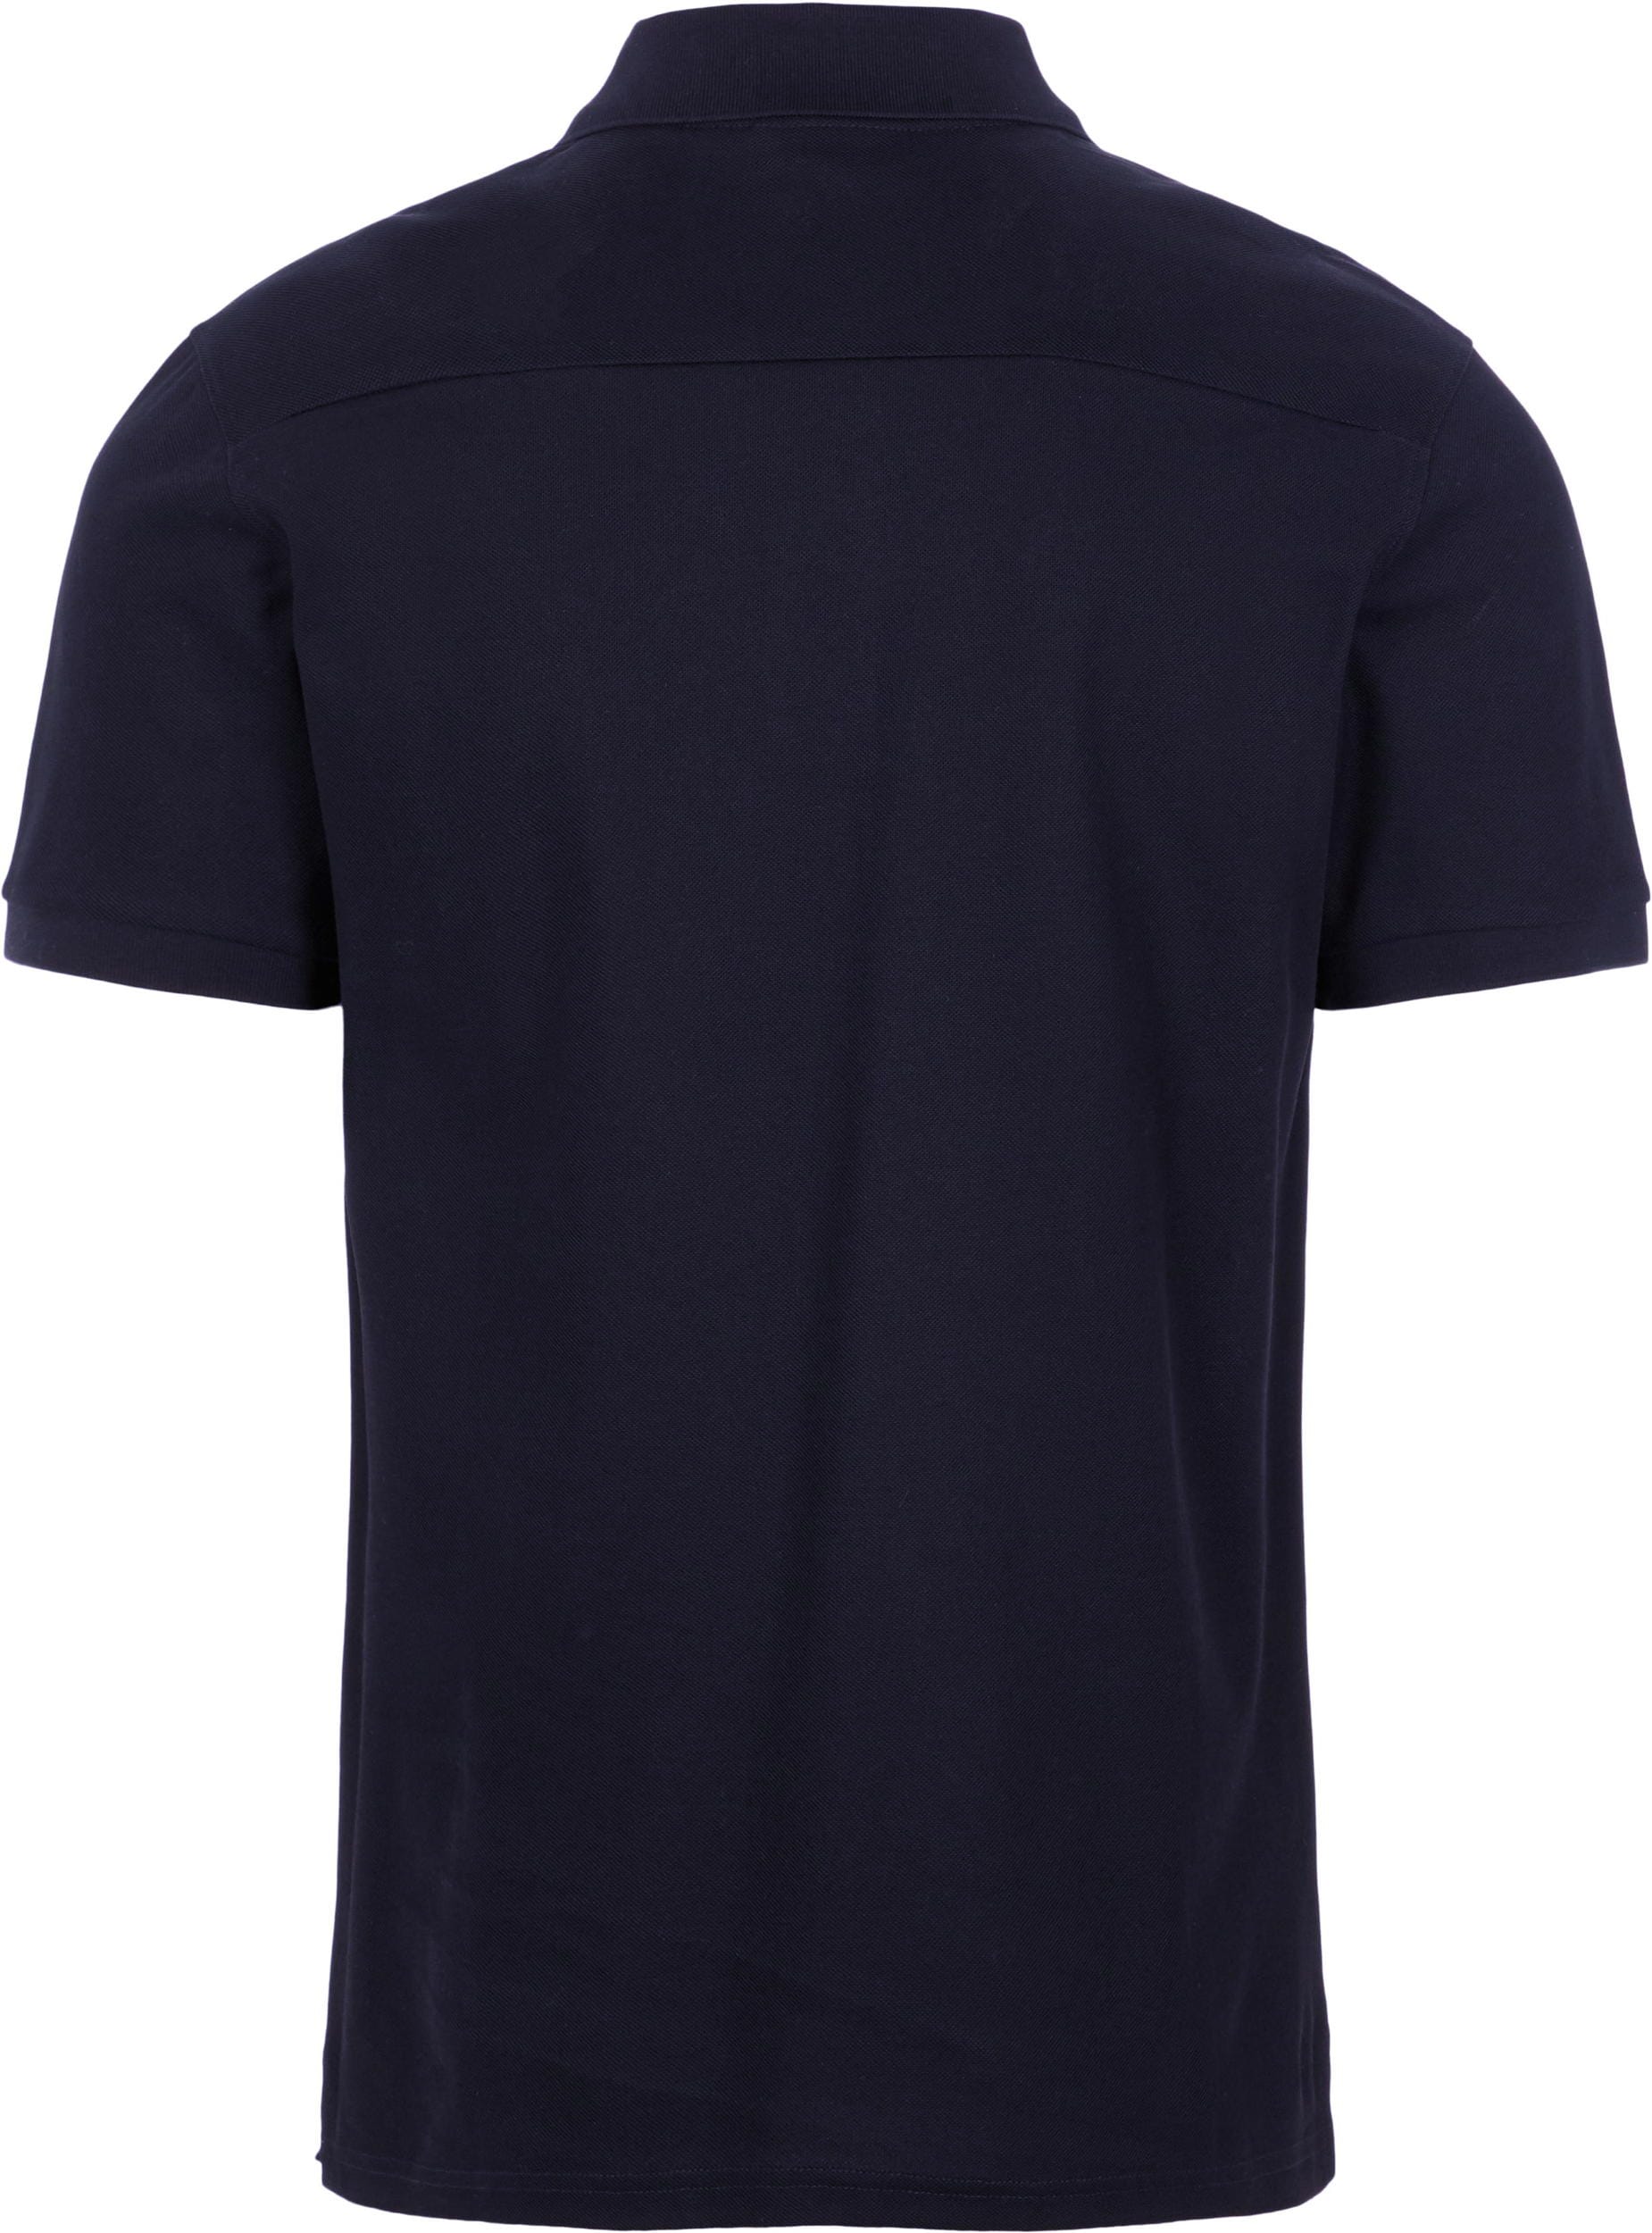 J.Lindeberg Troy ST Pique Polo, navy